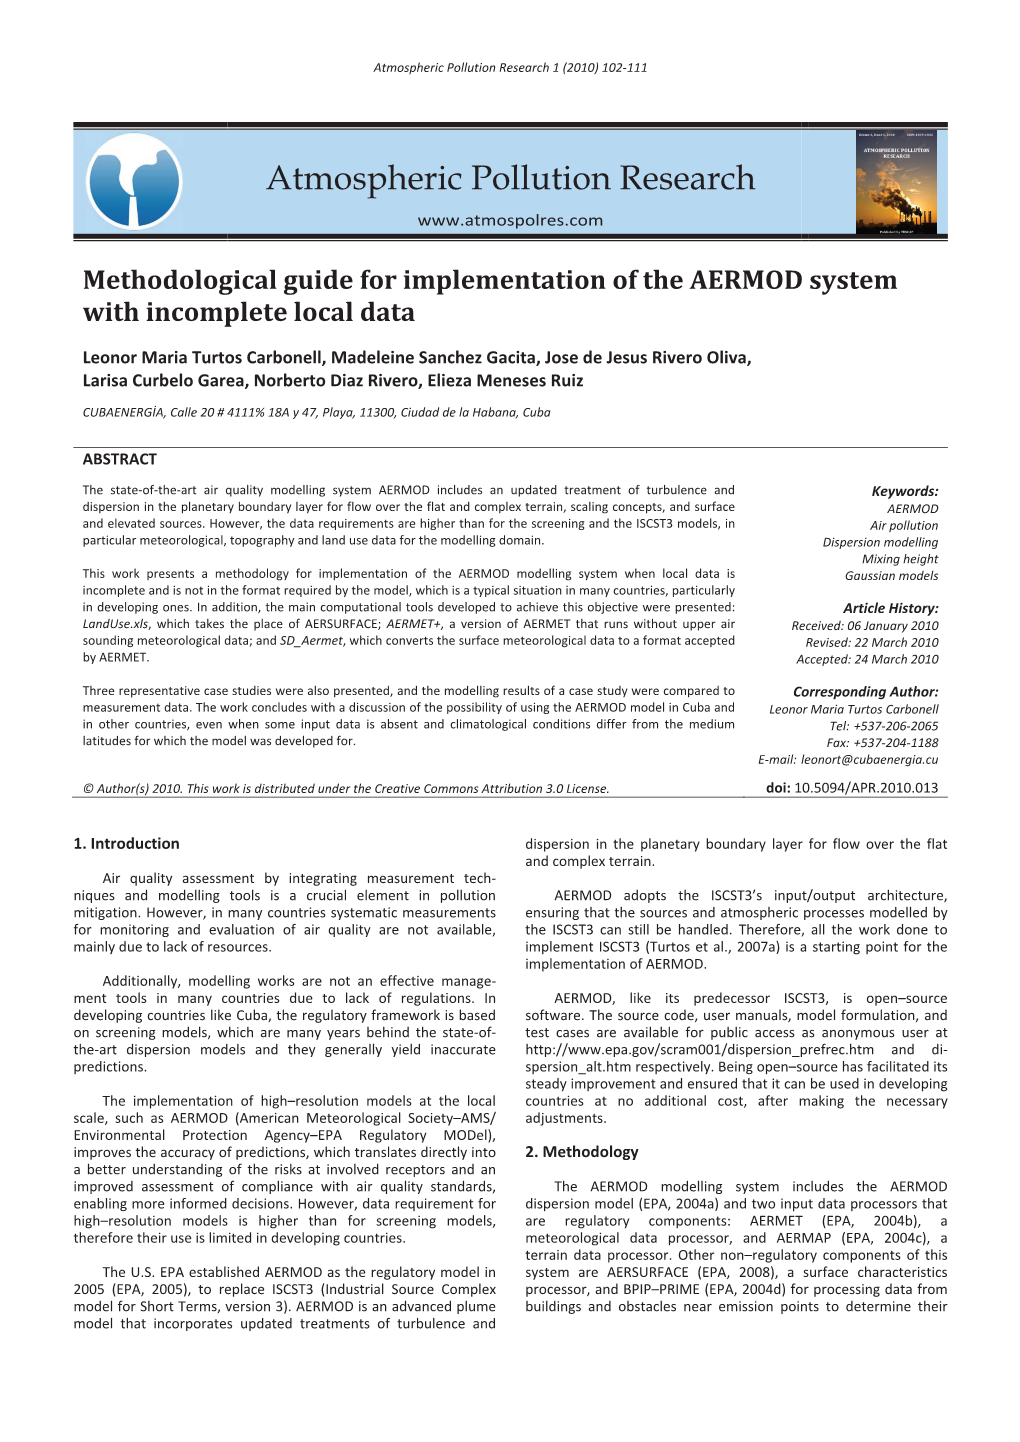 Methodological Guide for Implementation of the AERMOD System with Incomplete Local Data